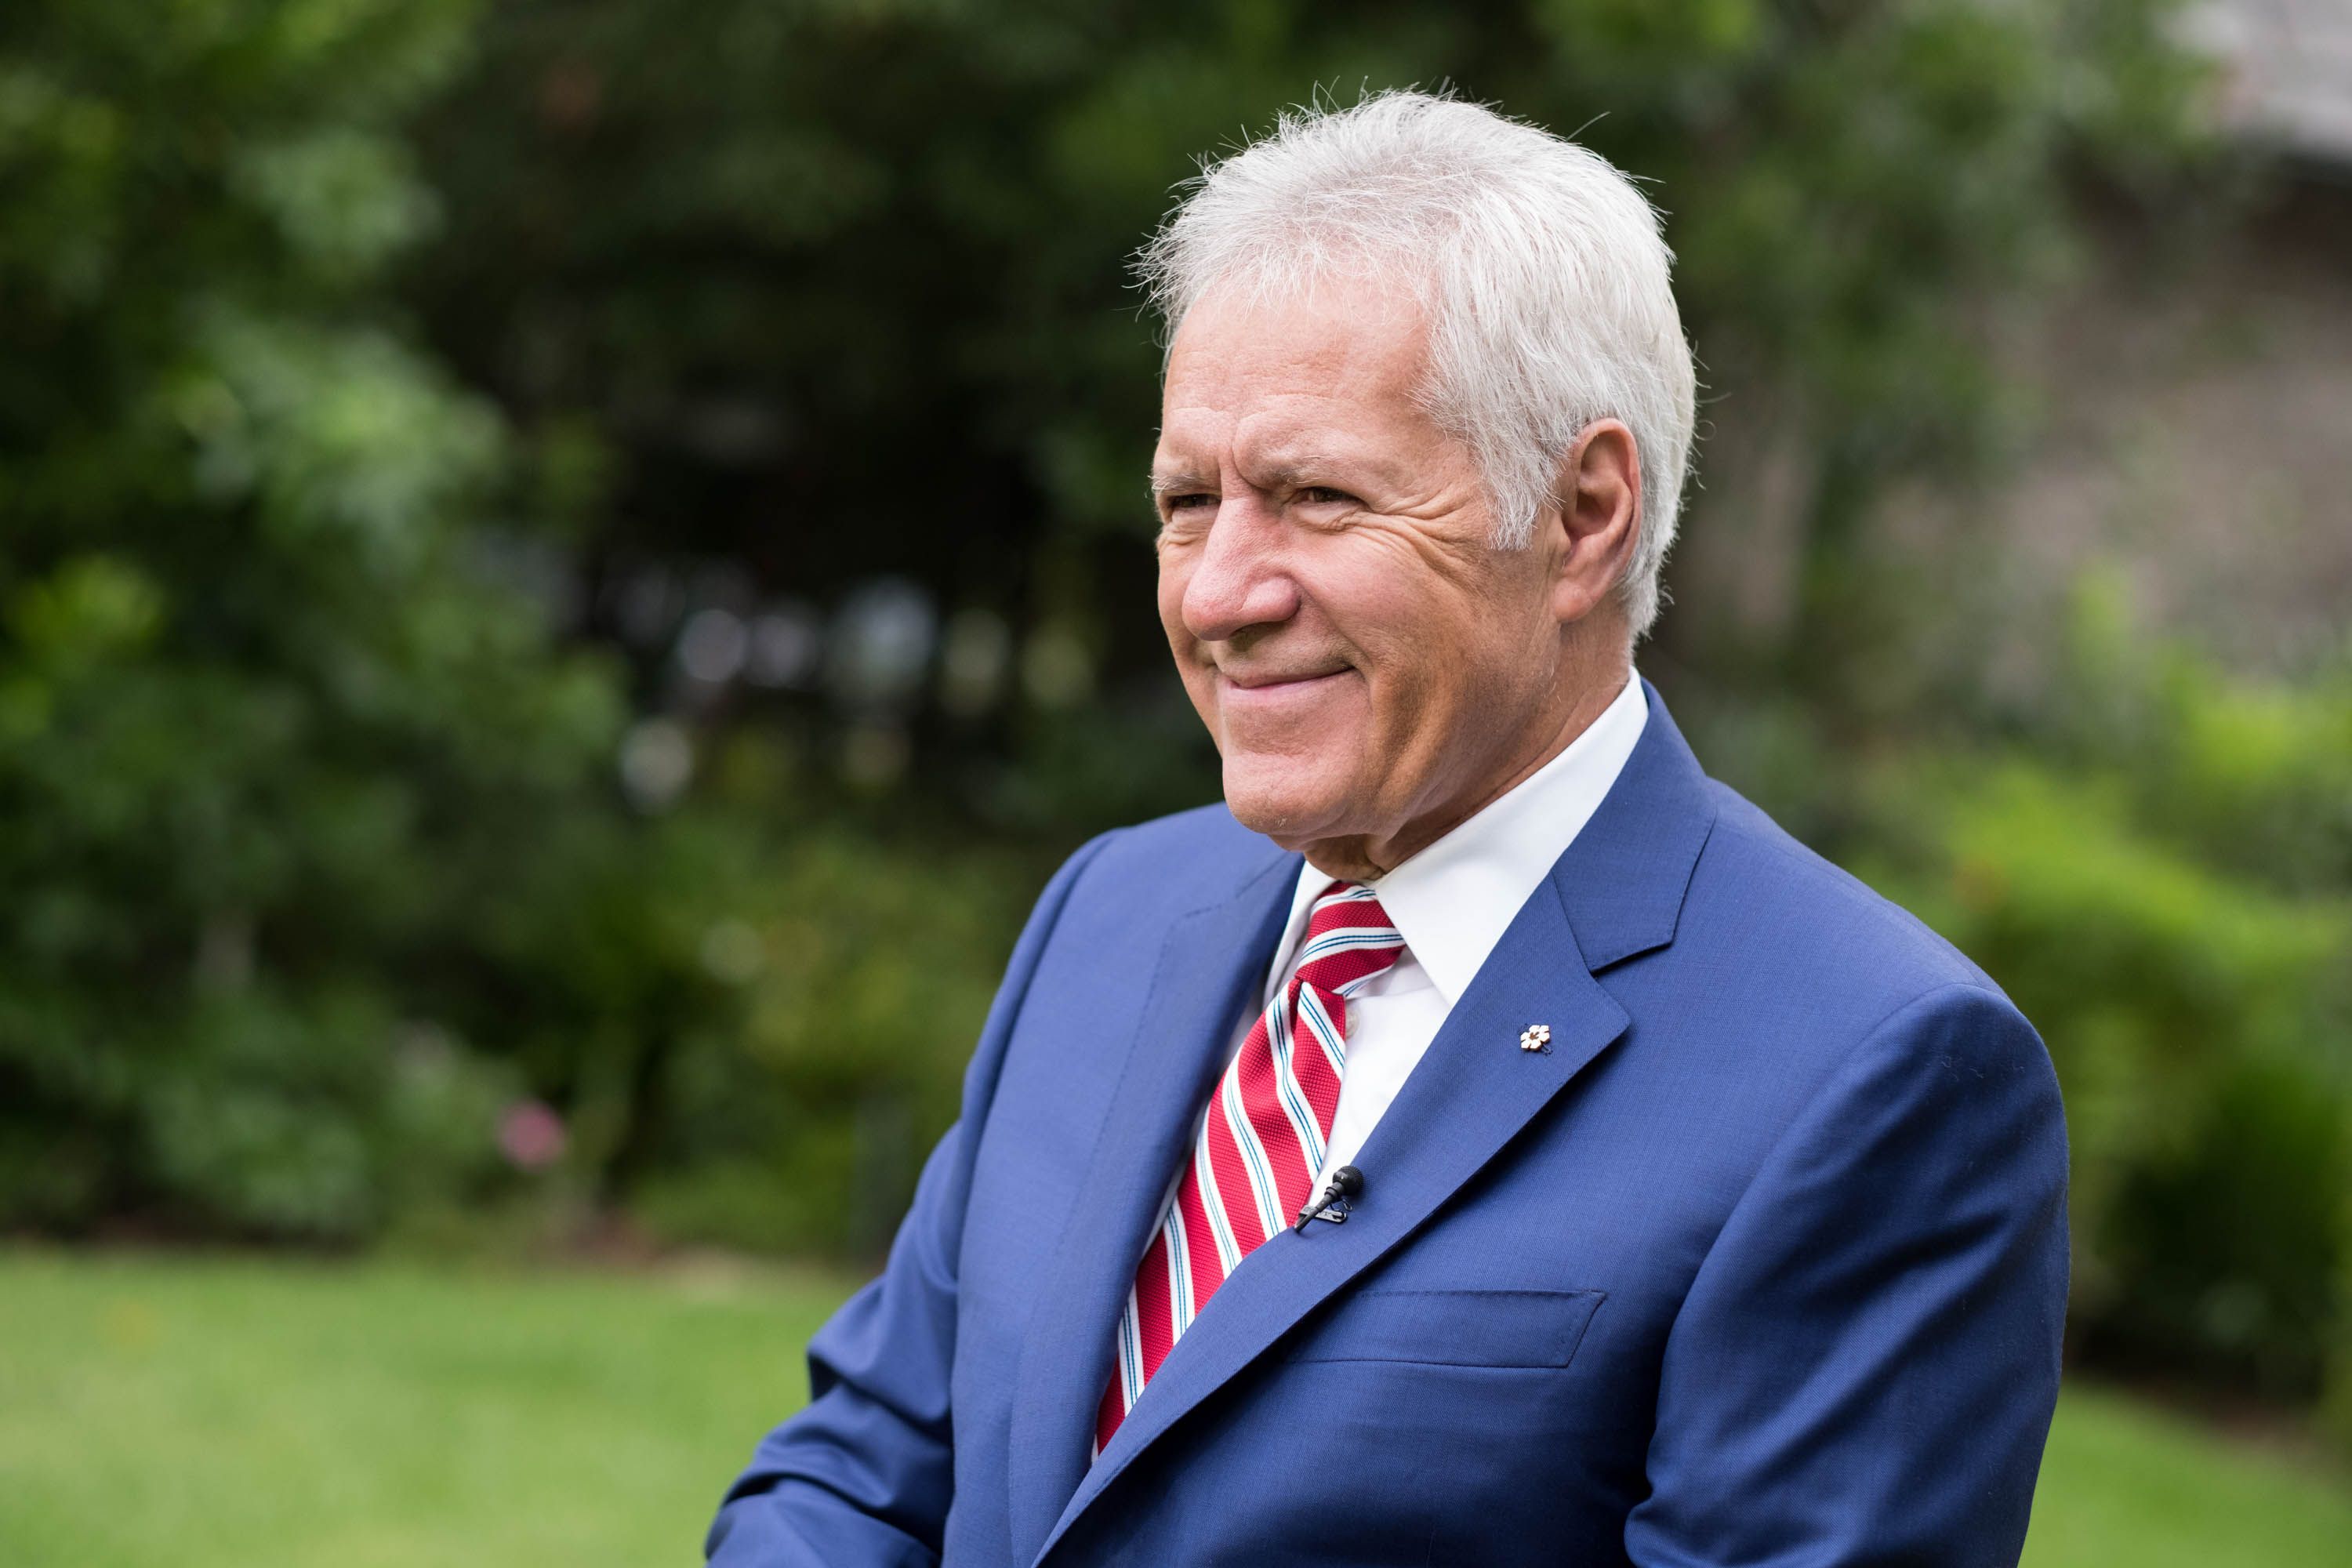 Alex Trebek attends the 150th anniversary of Canada's Confederation at the Official Residence of Canada. | Photo: GettyImages